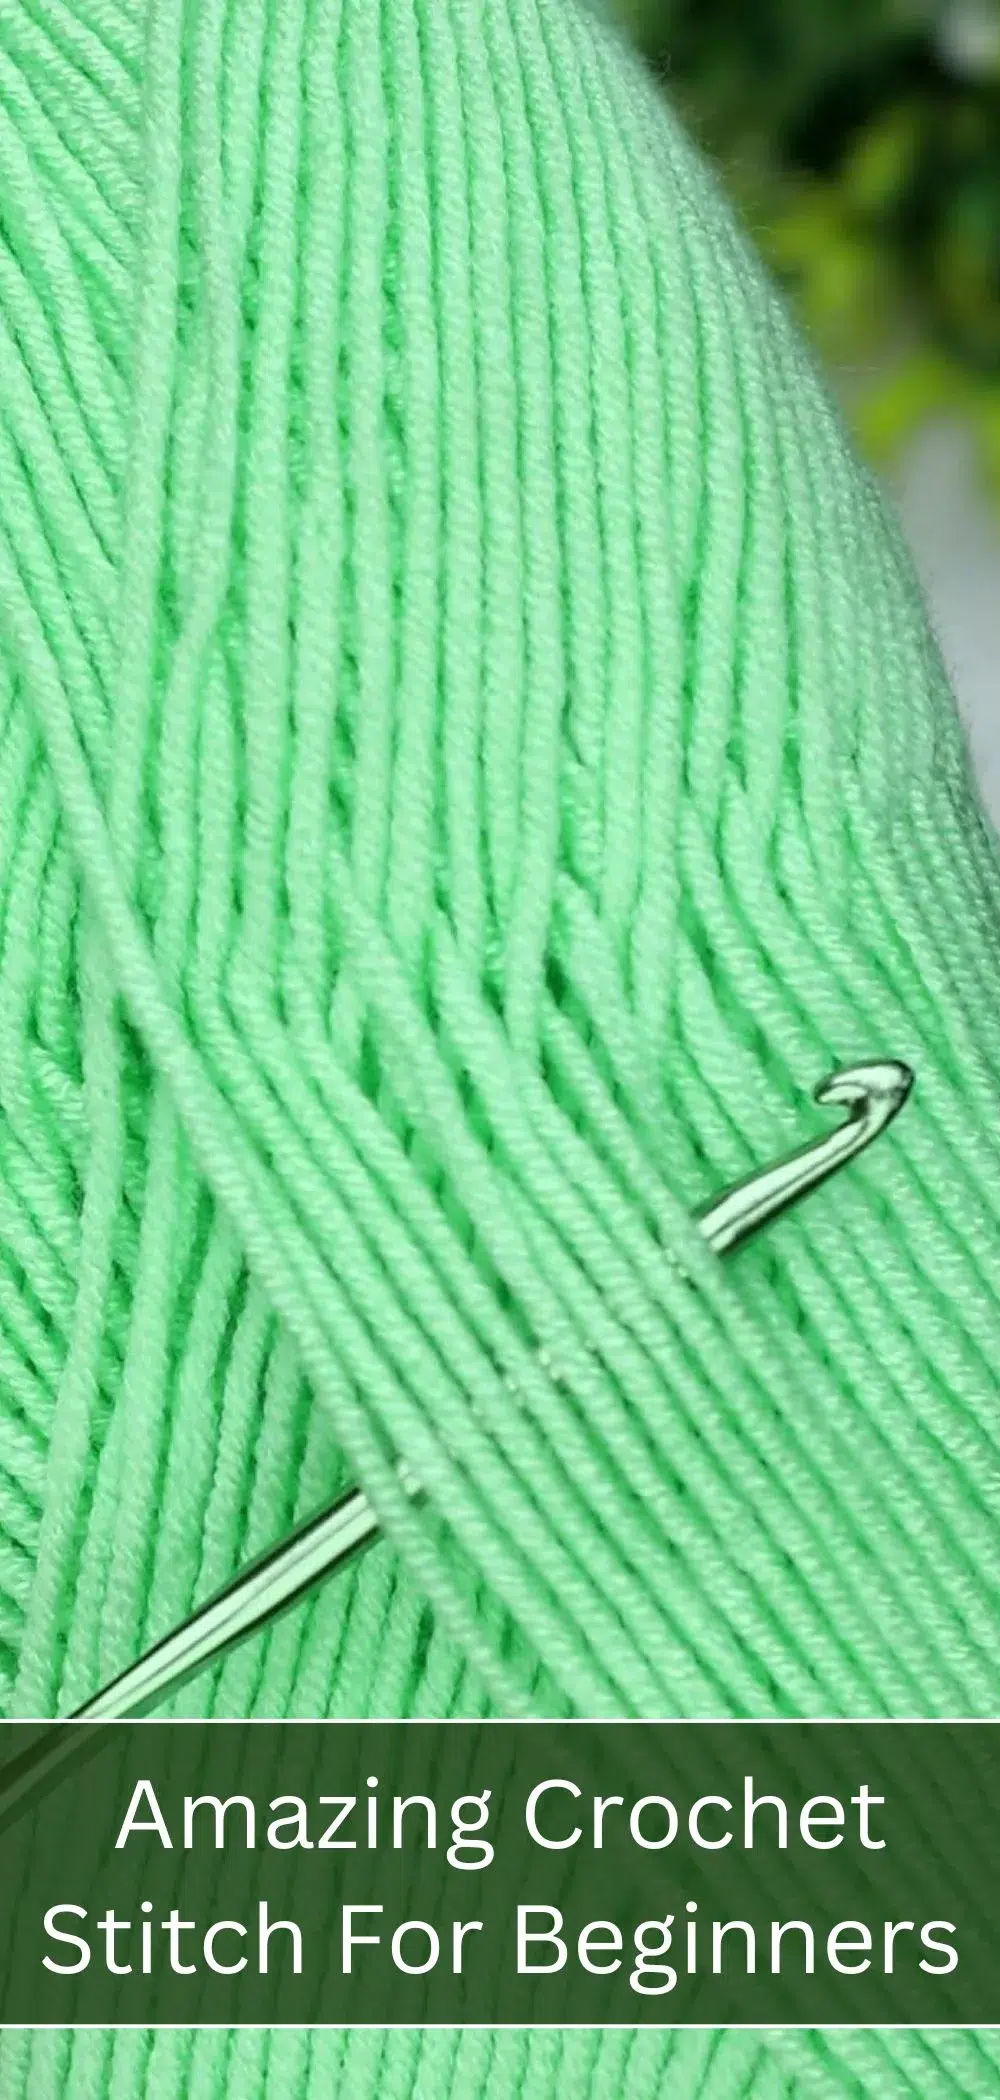 Such Amazing Crochet Stitch For Beginners is for free. You will use simple crochet techniques in this project.